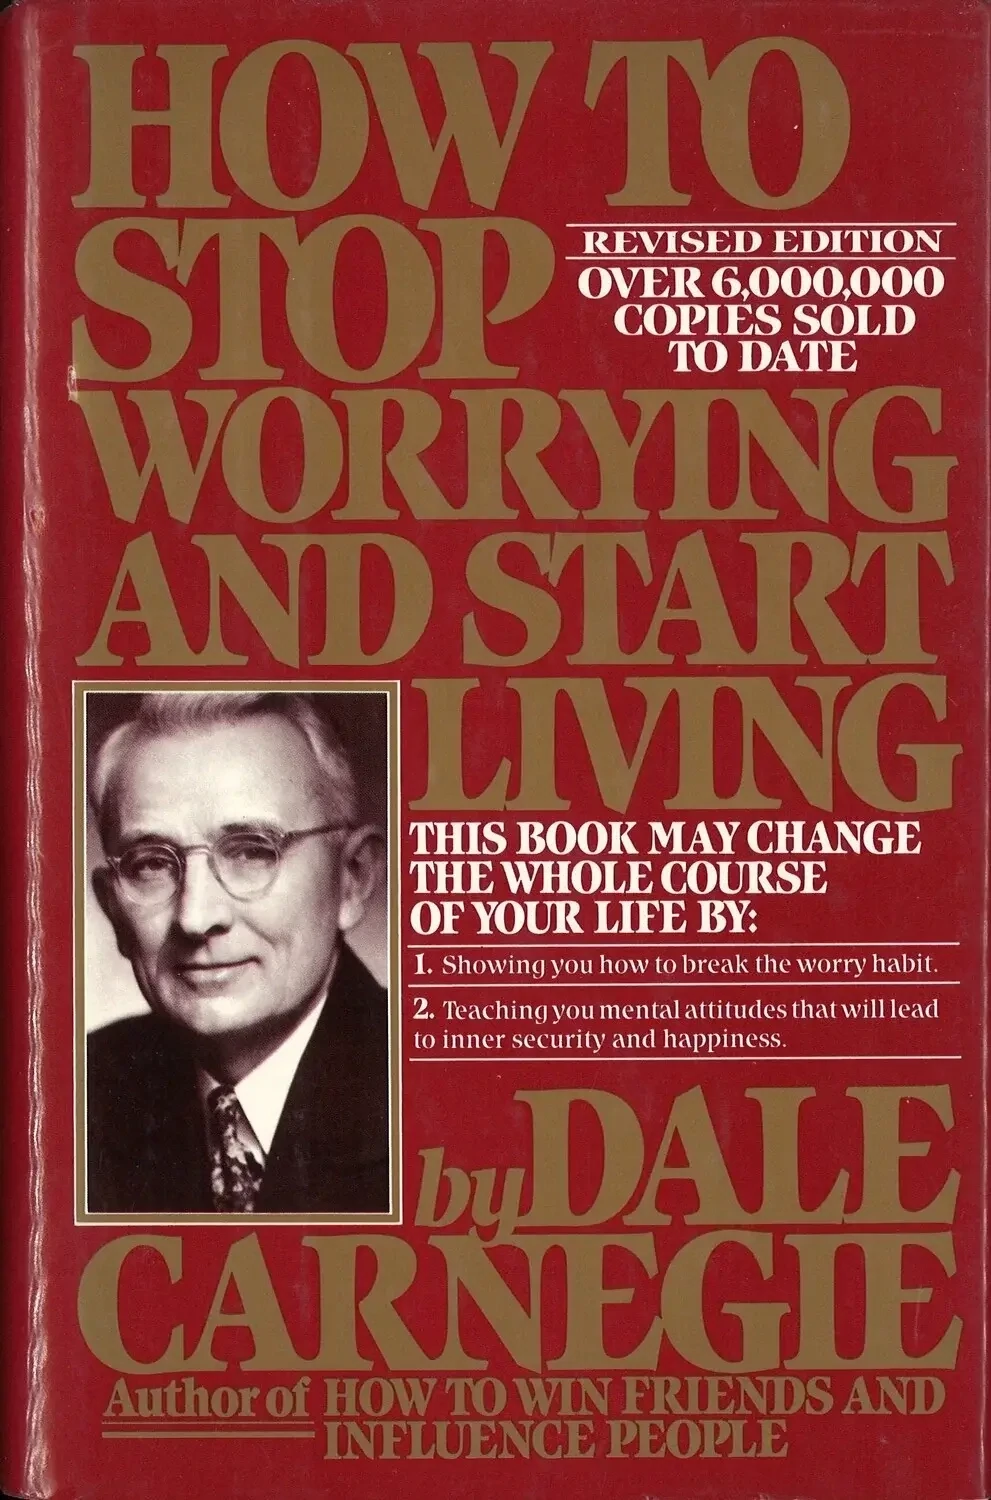 How to Stop Worrying and Start Living (Revised Edition), Dale Carnegie